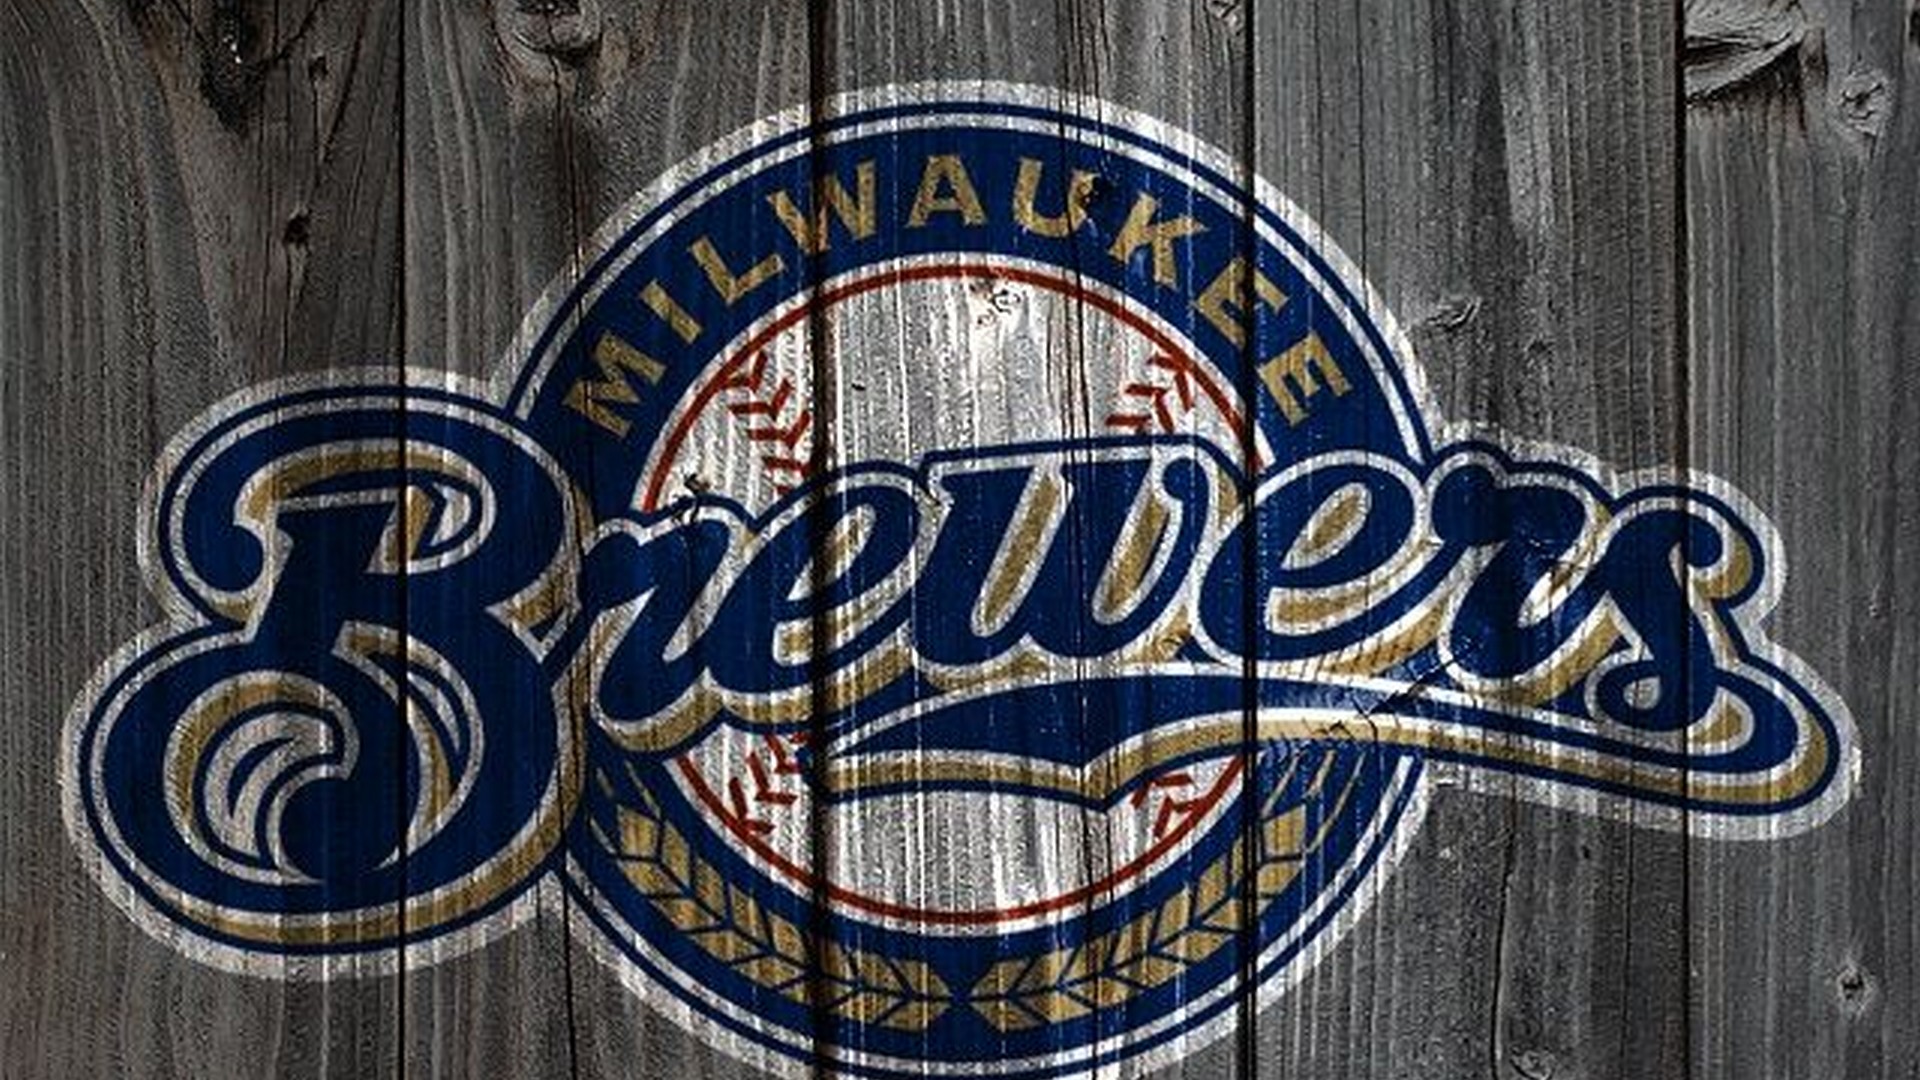 Milwaukee Brewers HD Wallpapers With high-resolution 1920X1080 pixel. You can use this wallpaper for Mac Desktop Wallpaper, Laptop Screensavers, Android Wallpapers, Tablet or iPhone Home Screen and another mobile phone device